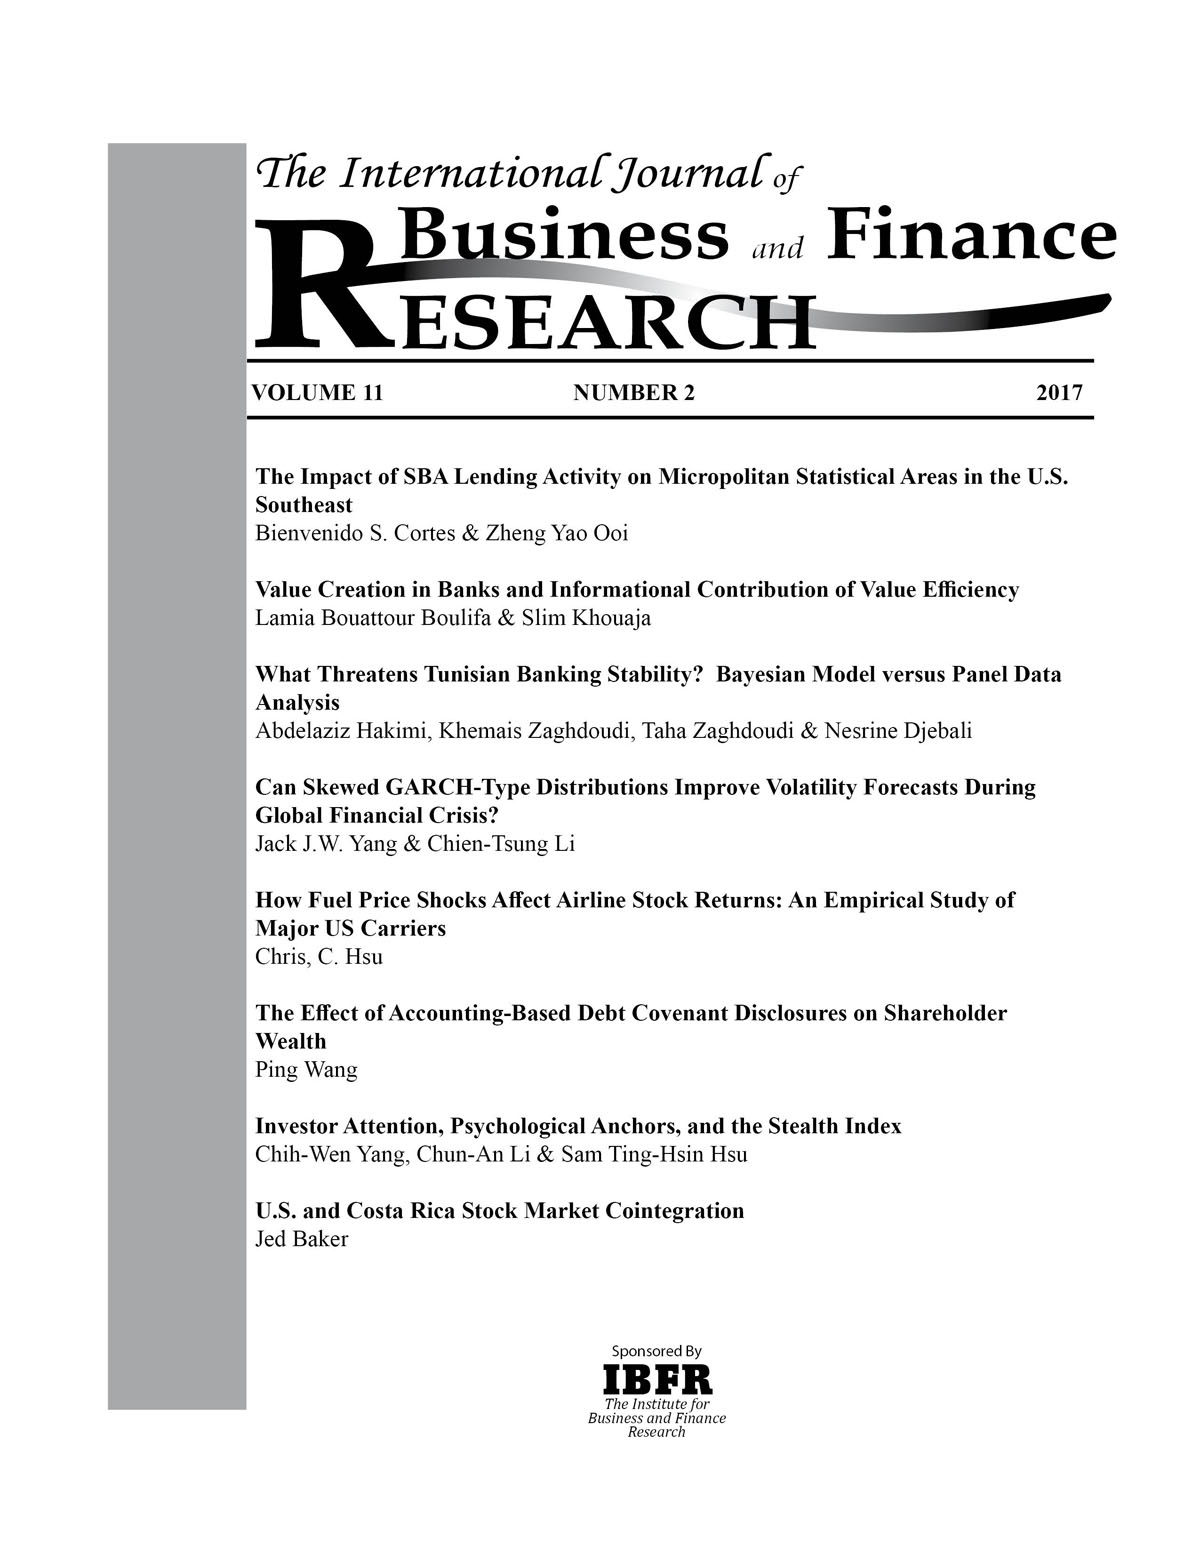 research in international business and finance